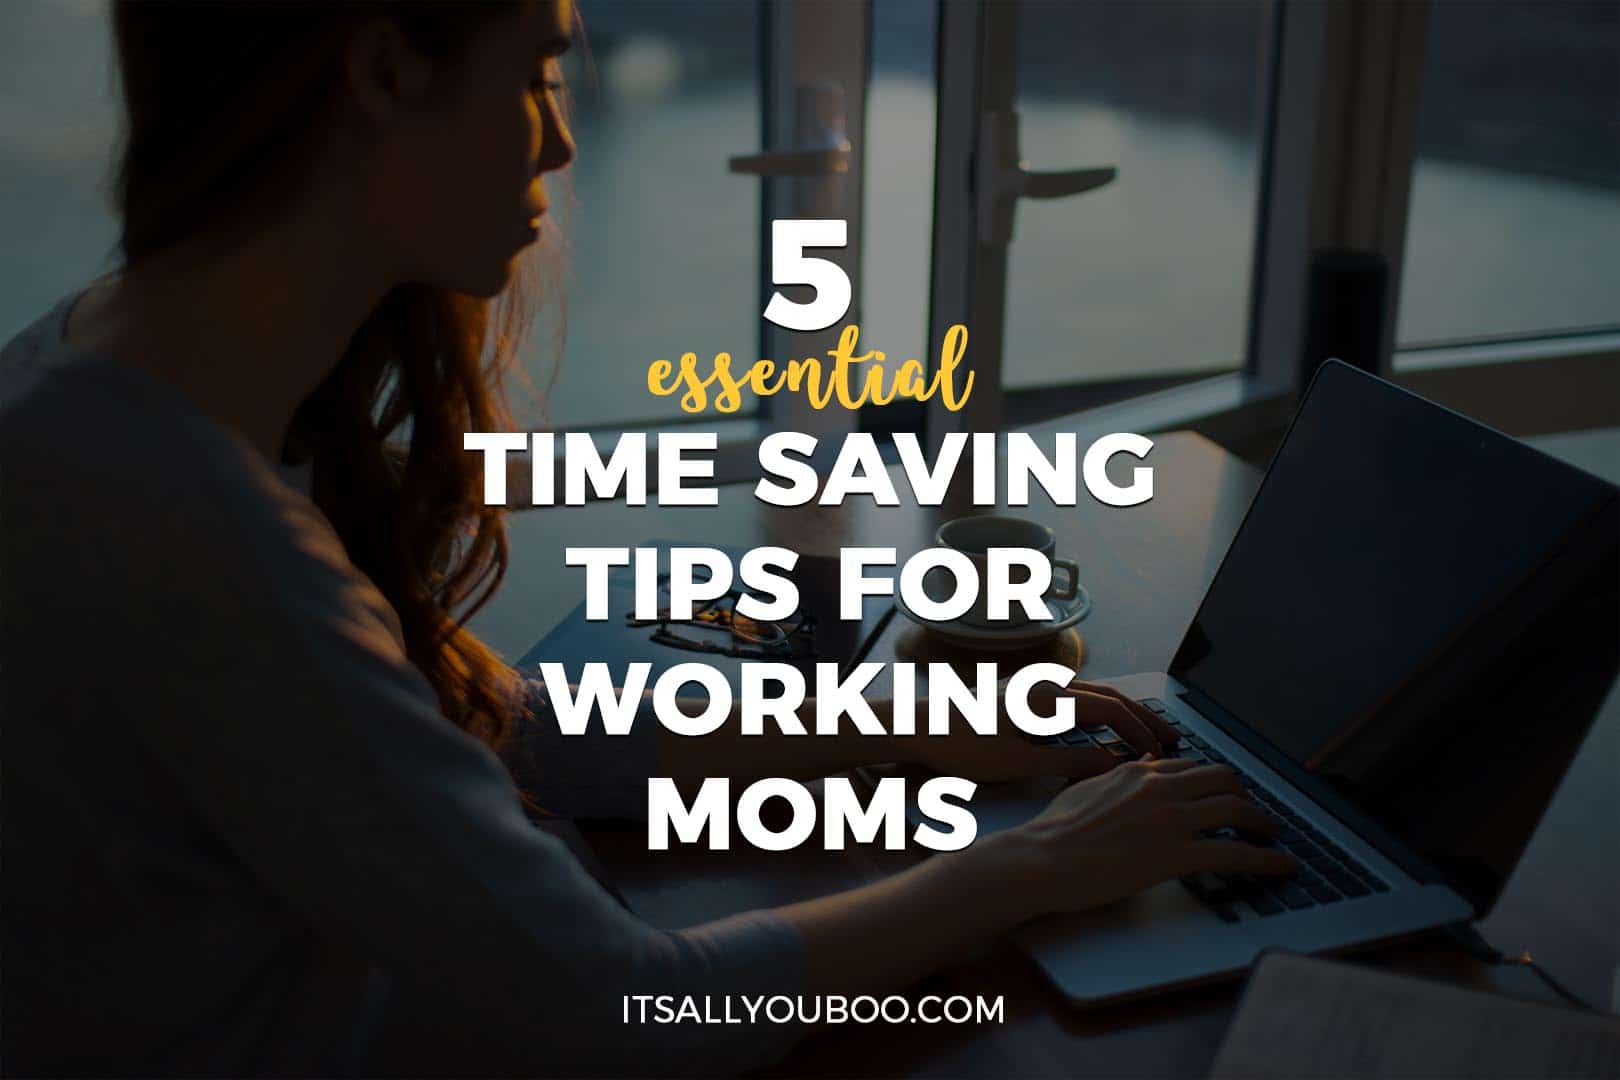 5 Essential Time Saving Tips for Working Moms